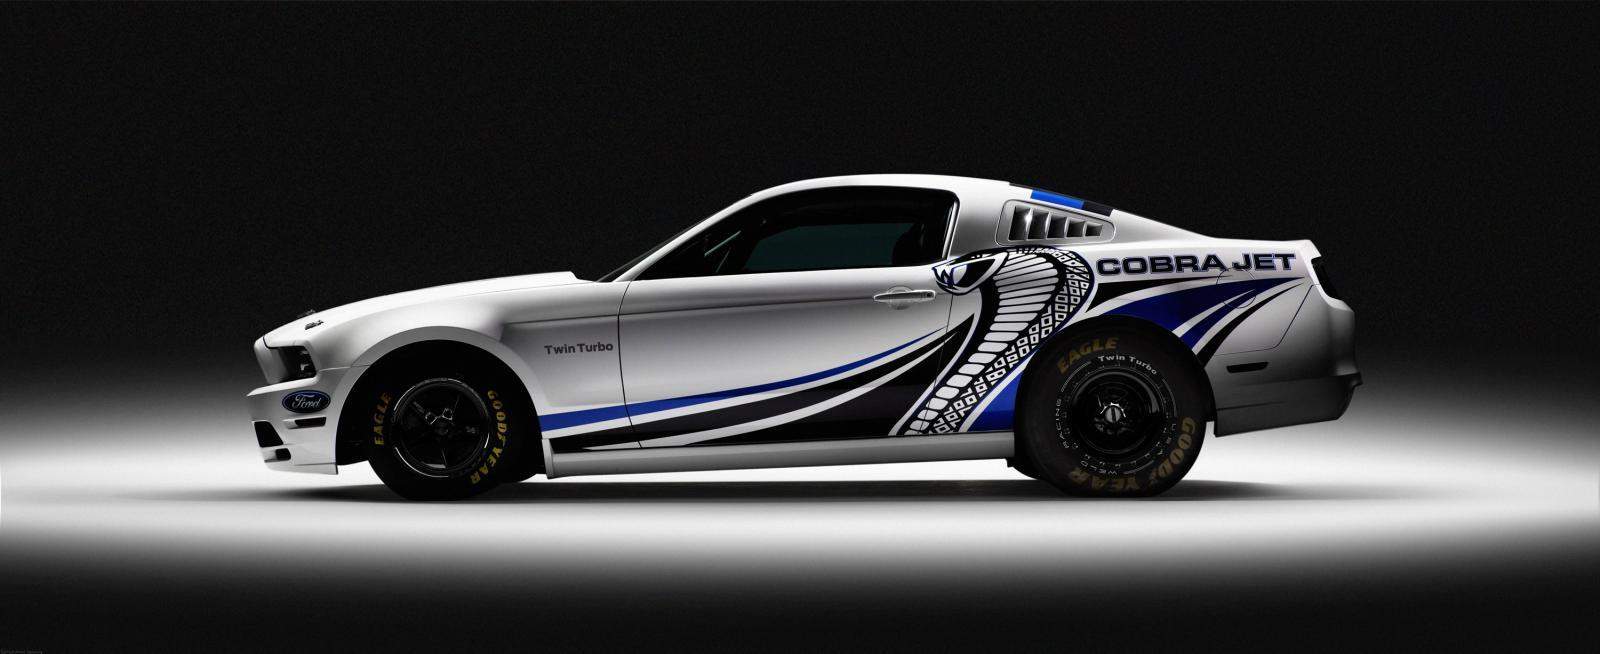 Ford Mustang Cobra Jet Concept 3